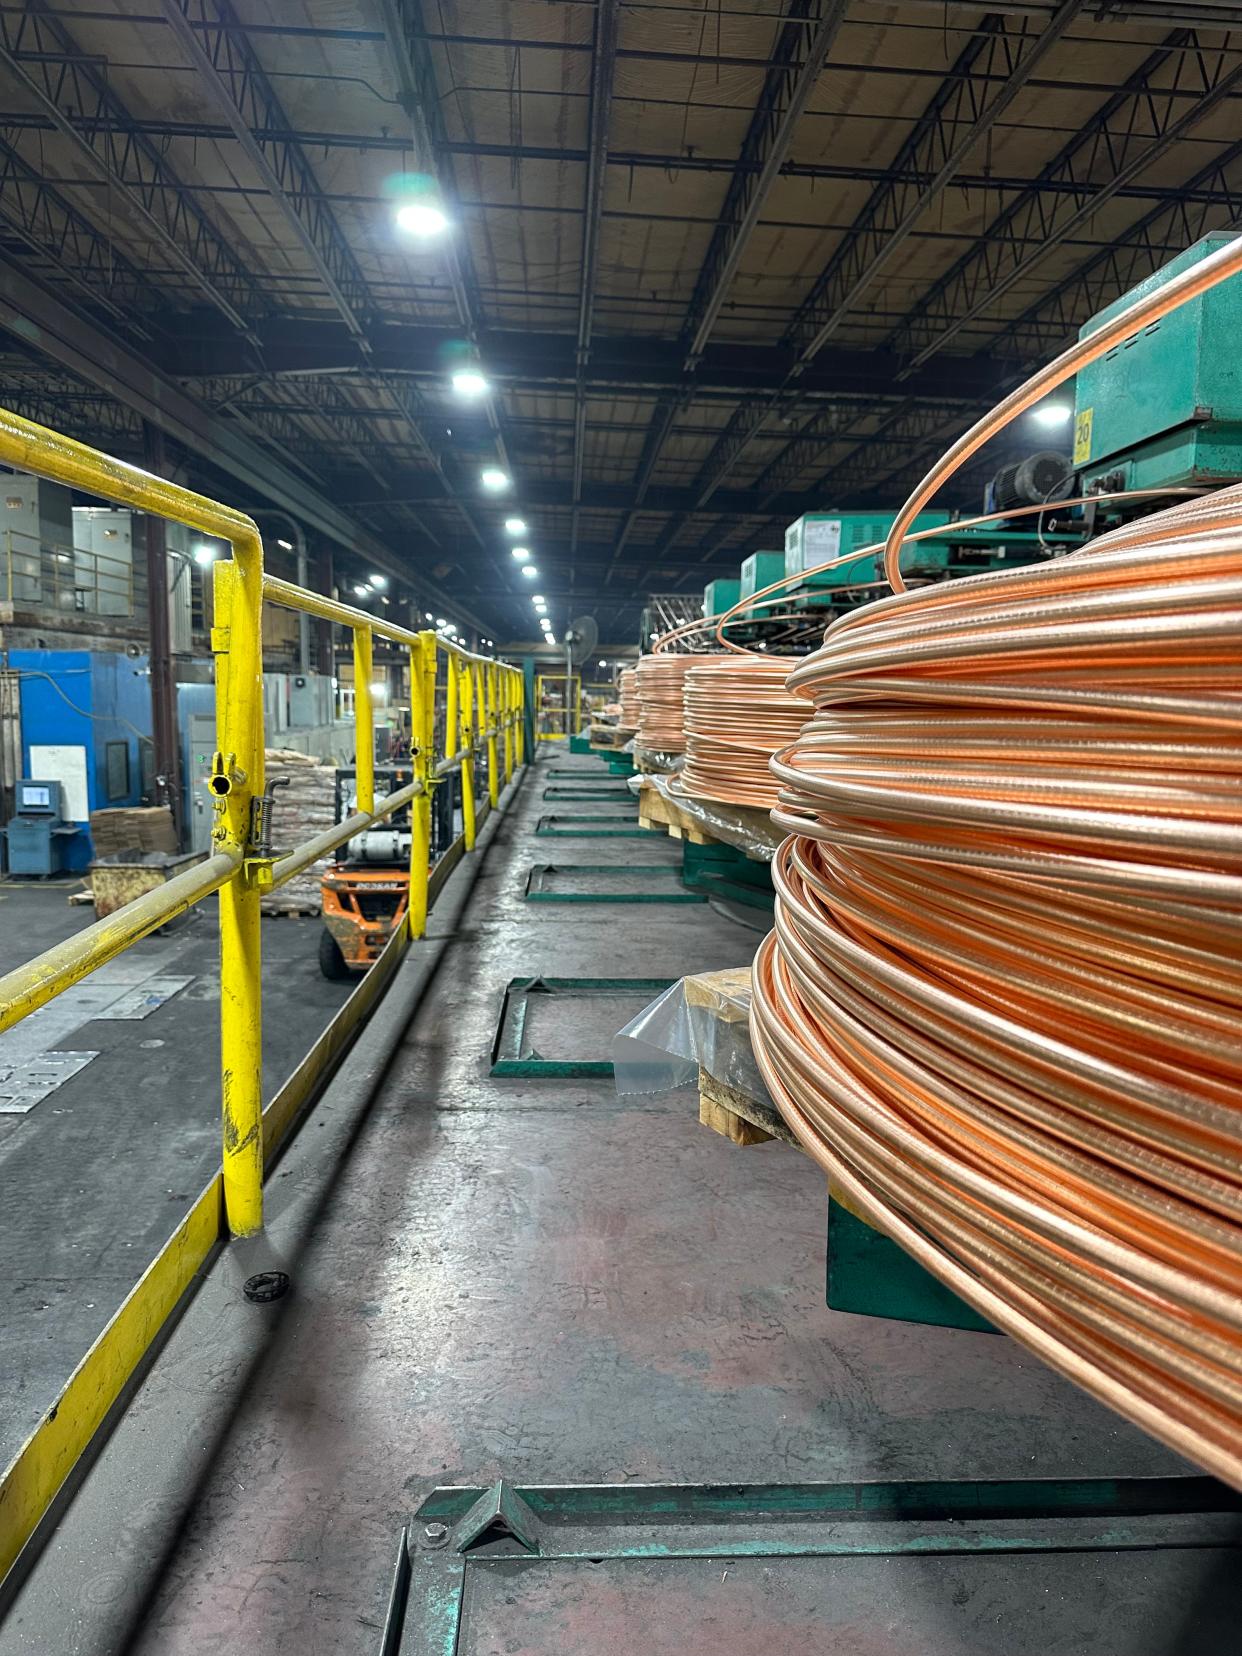 IMC-Metals America, which produces copper products, recently announced an expansion that will bring additional jobs to Cleveland County.